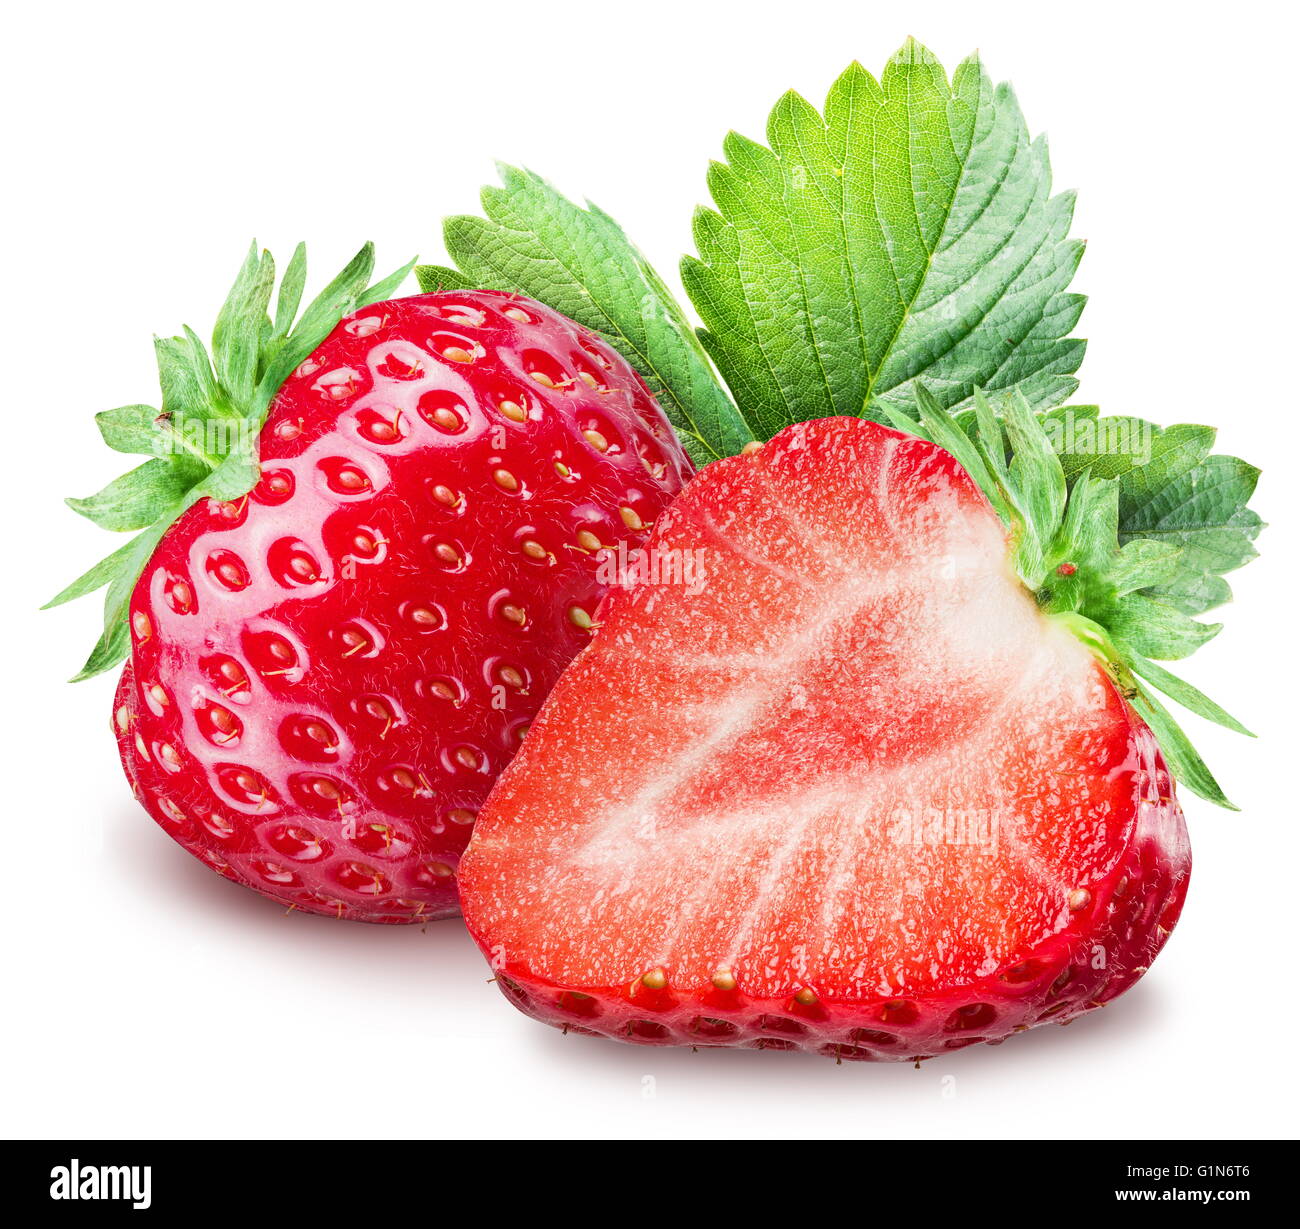 Strawberries on the white background. File contains clipping paths. Stock Photo